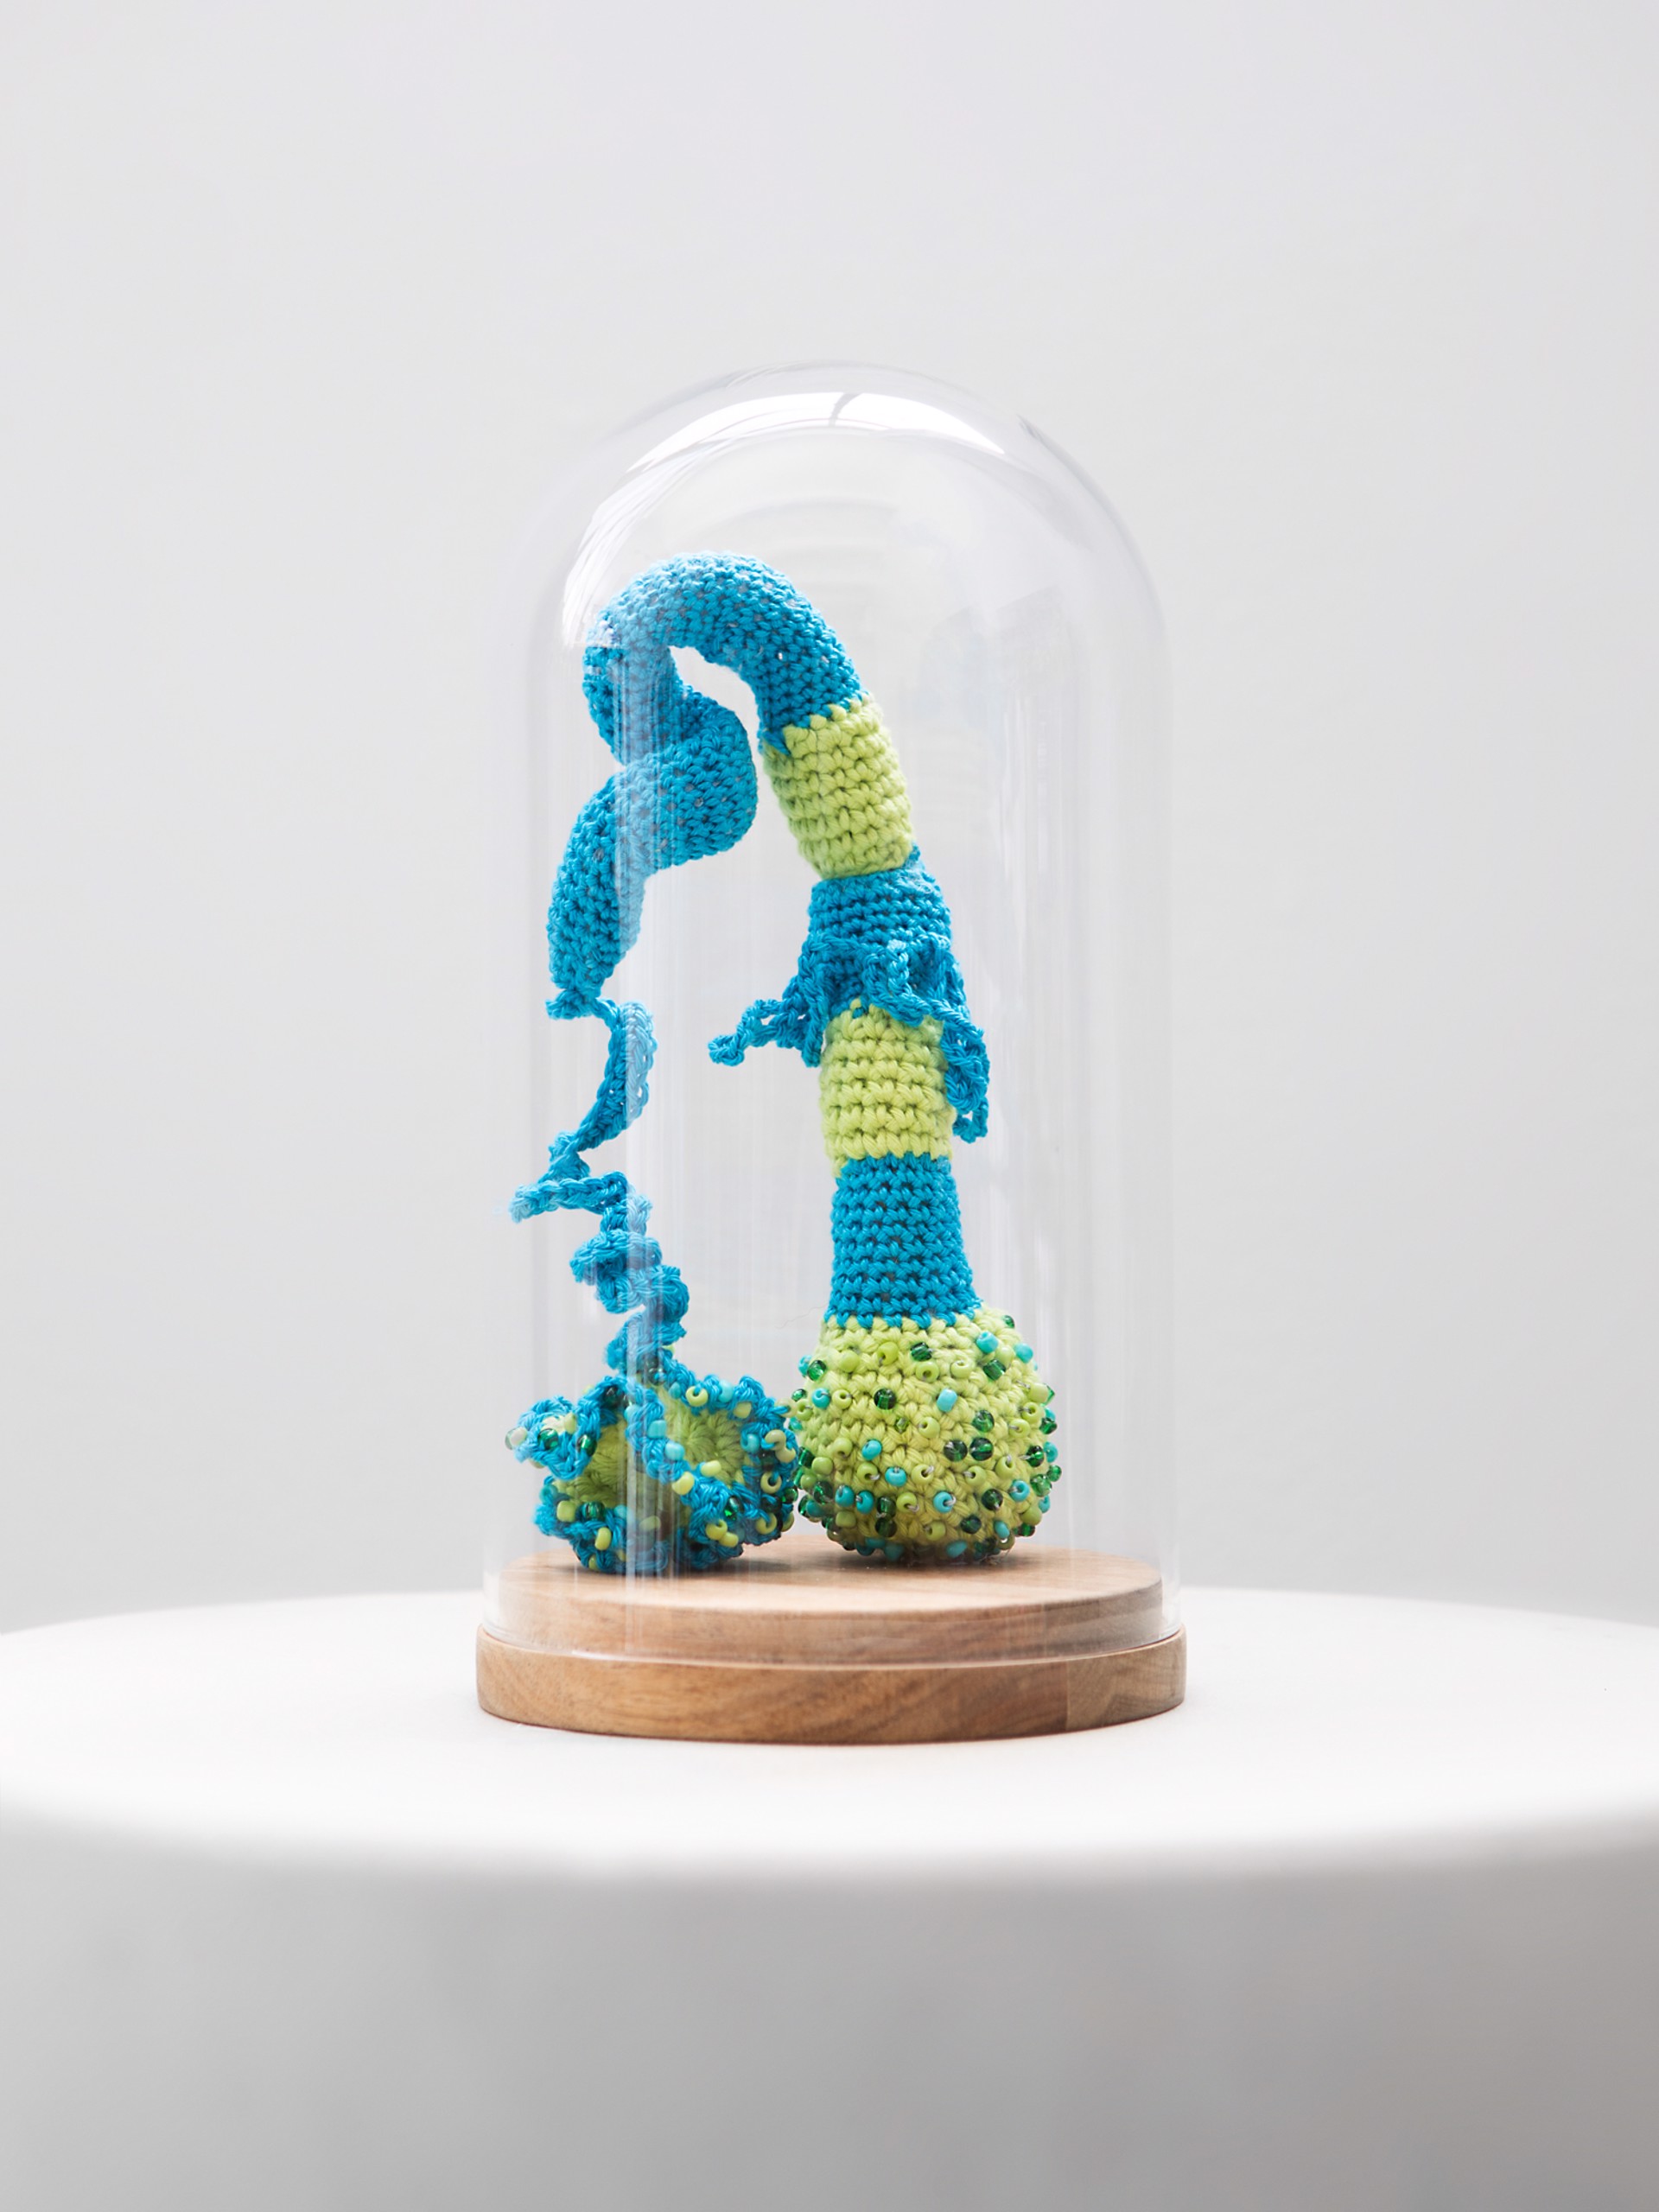 Contained Bacteria  by Monica Ceballos Brenninkmeijer